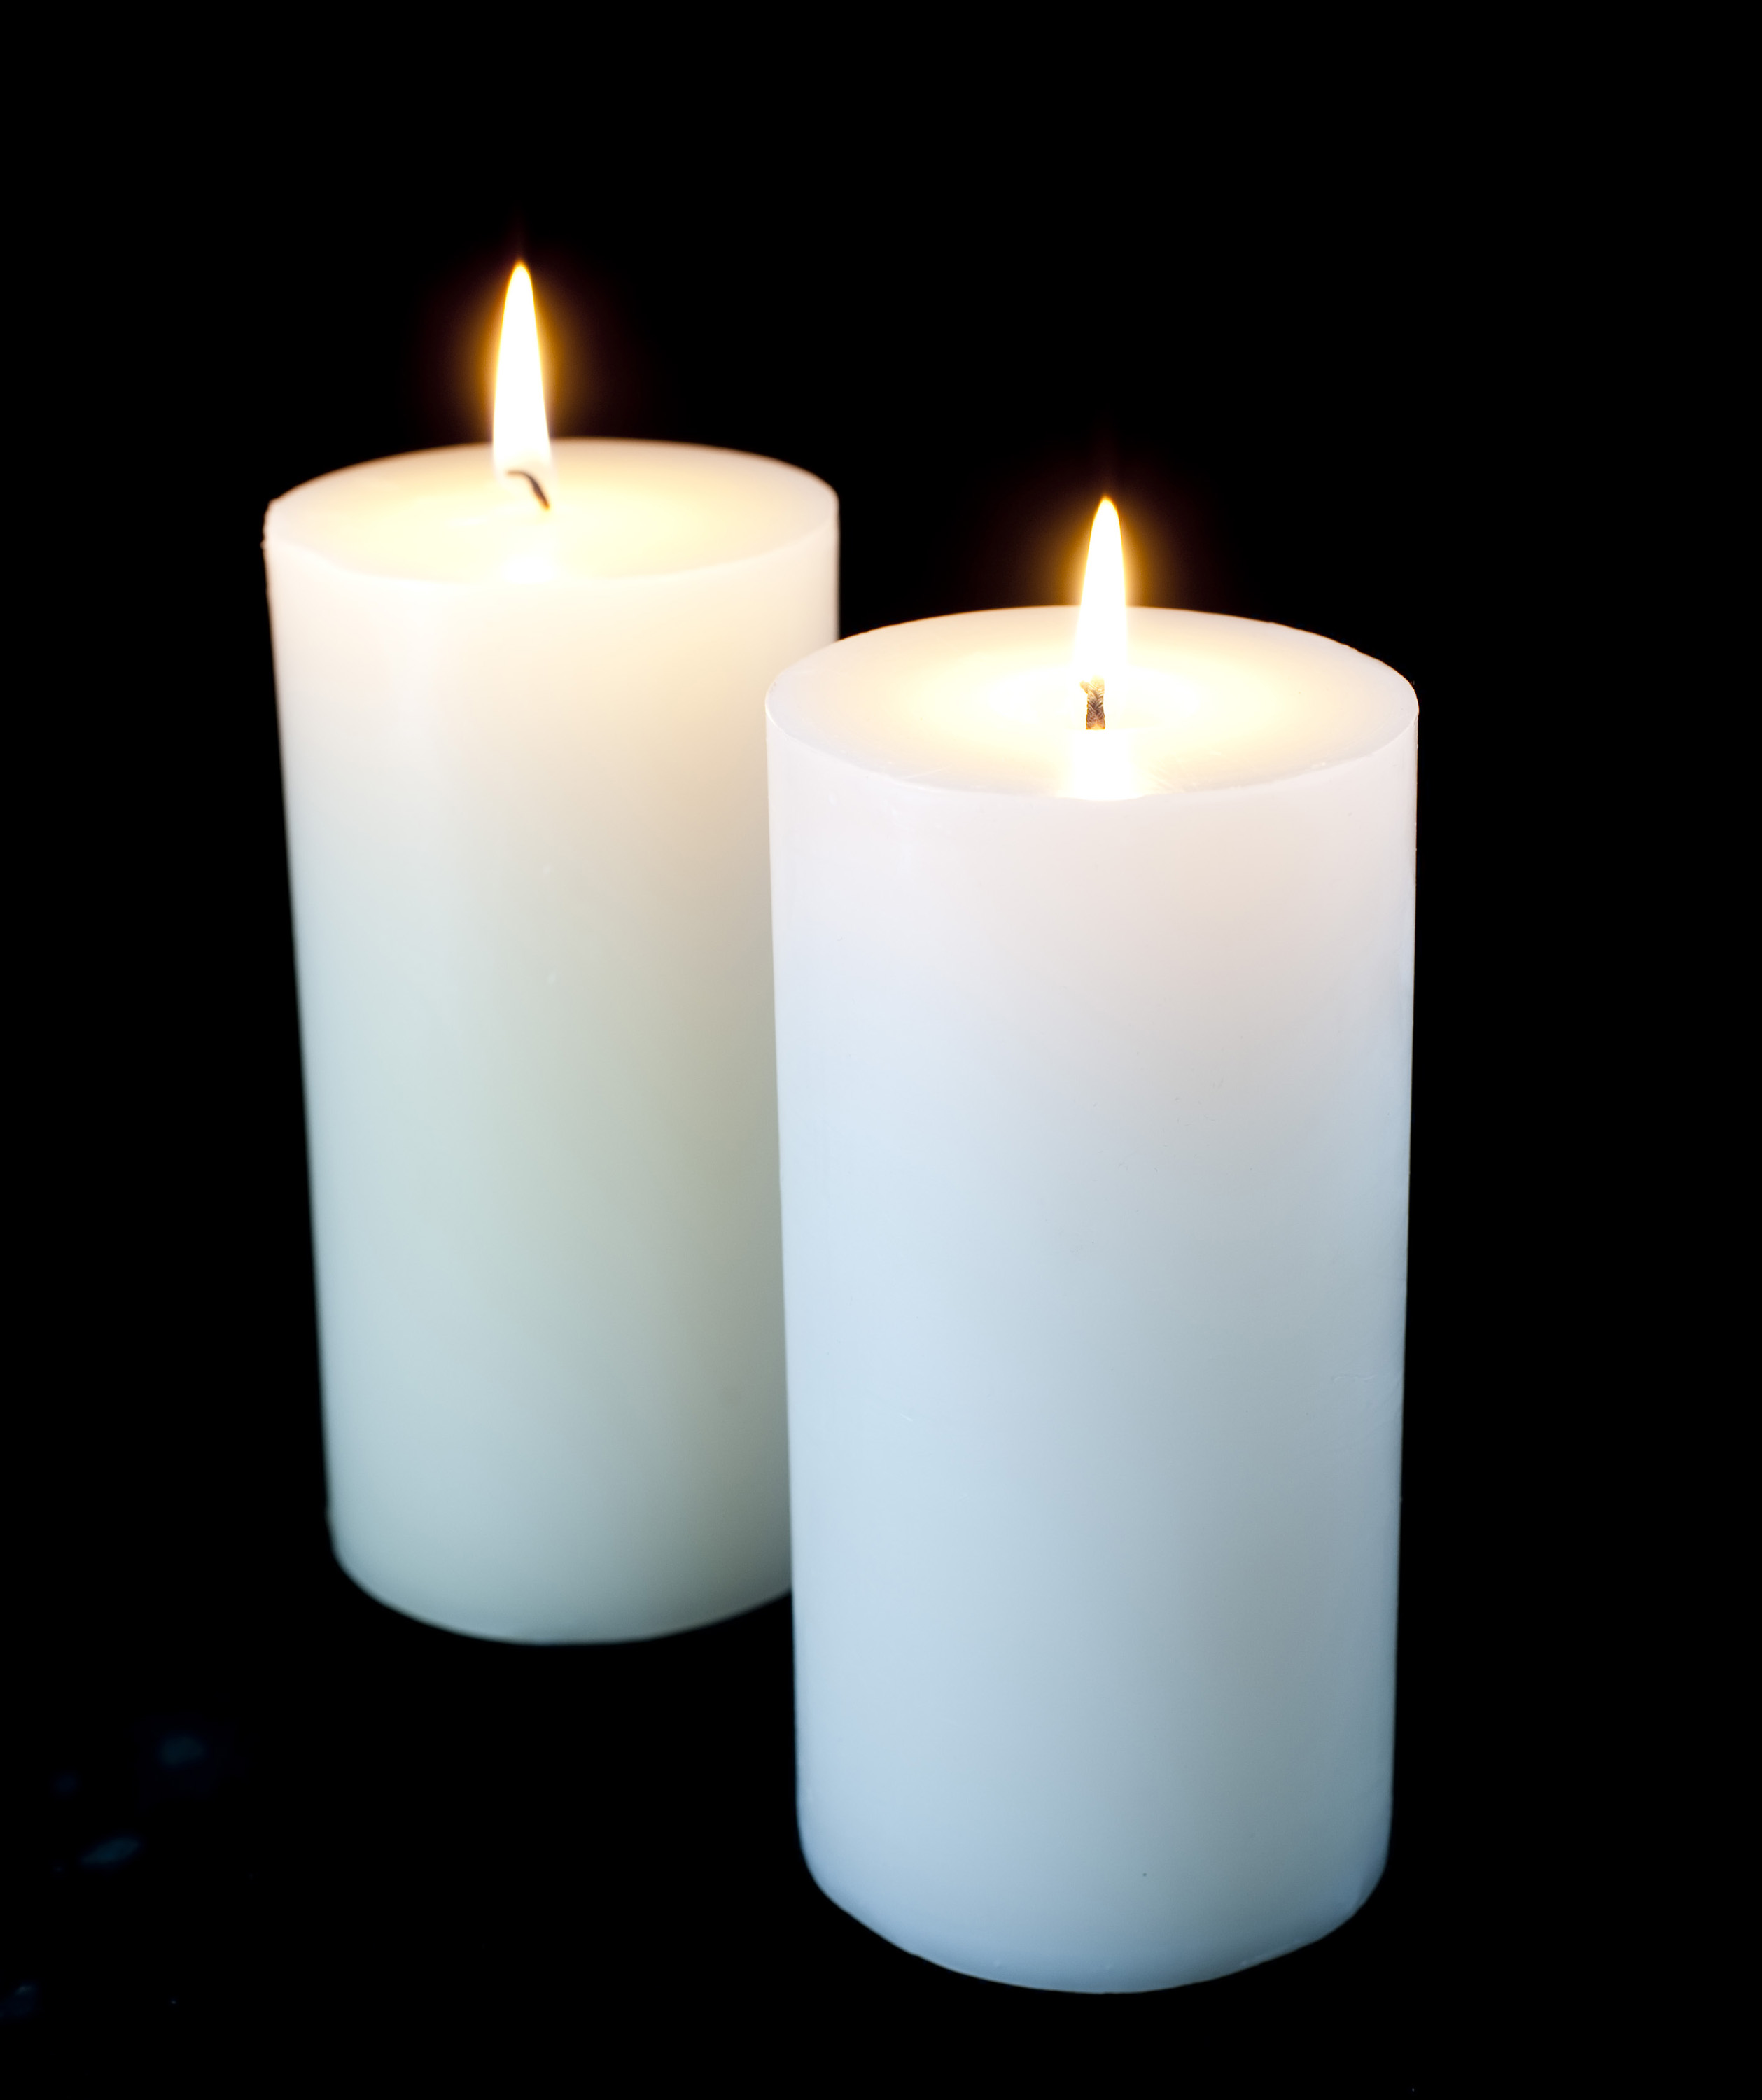 Free Stock Photo 3593-christmas candles | freeimageslive